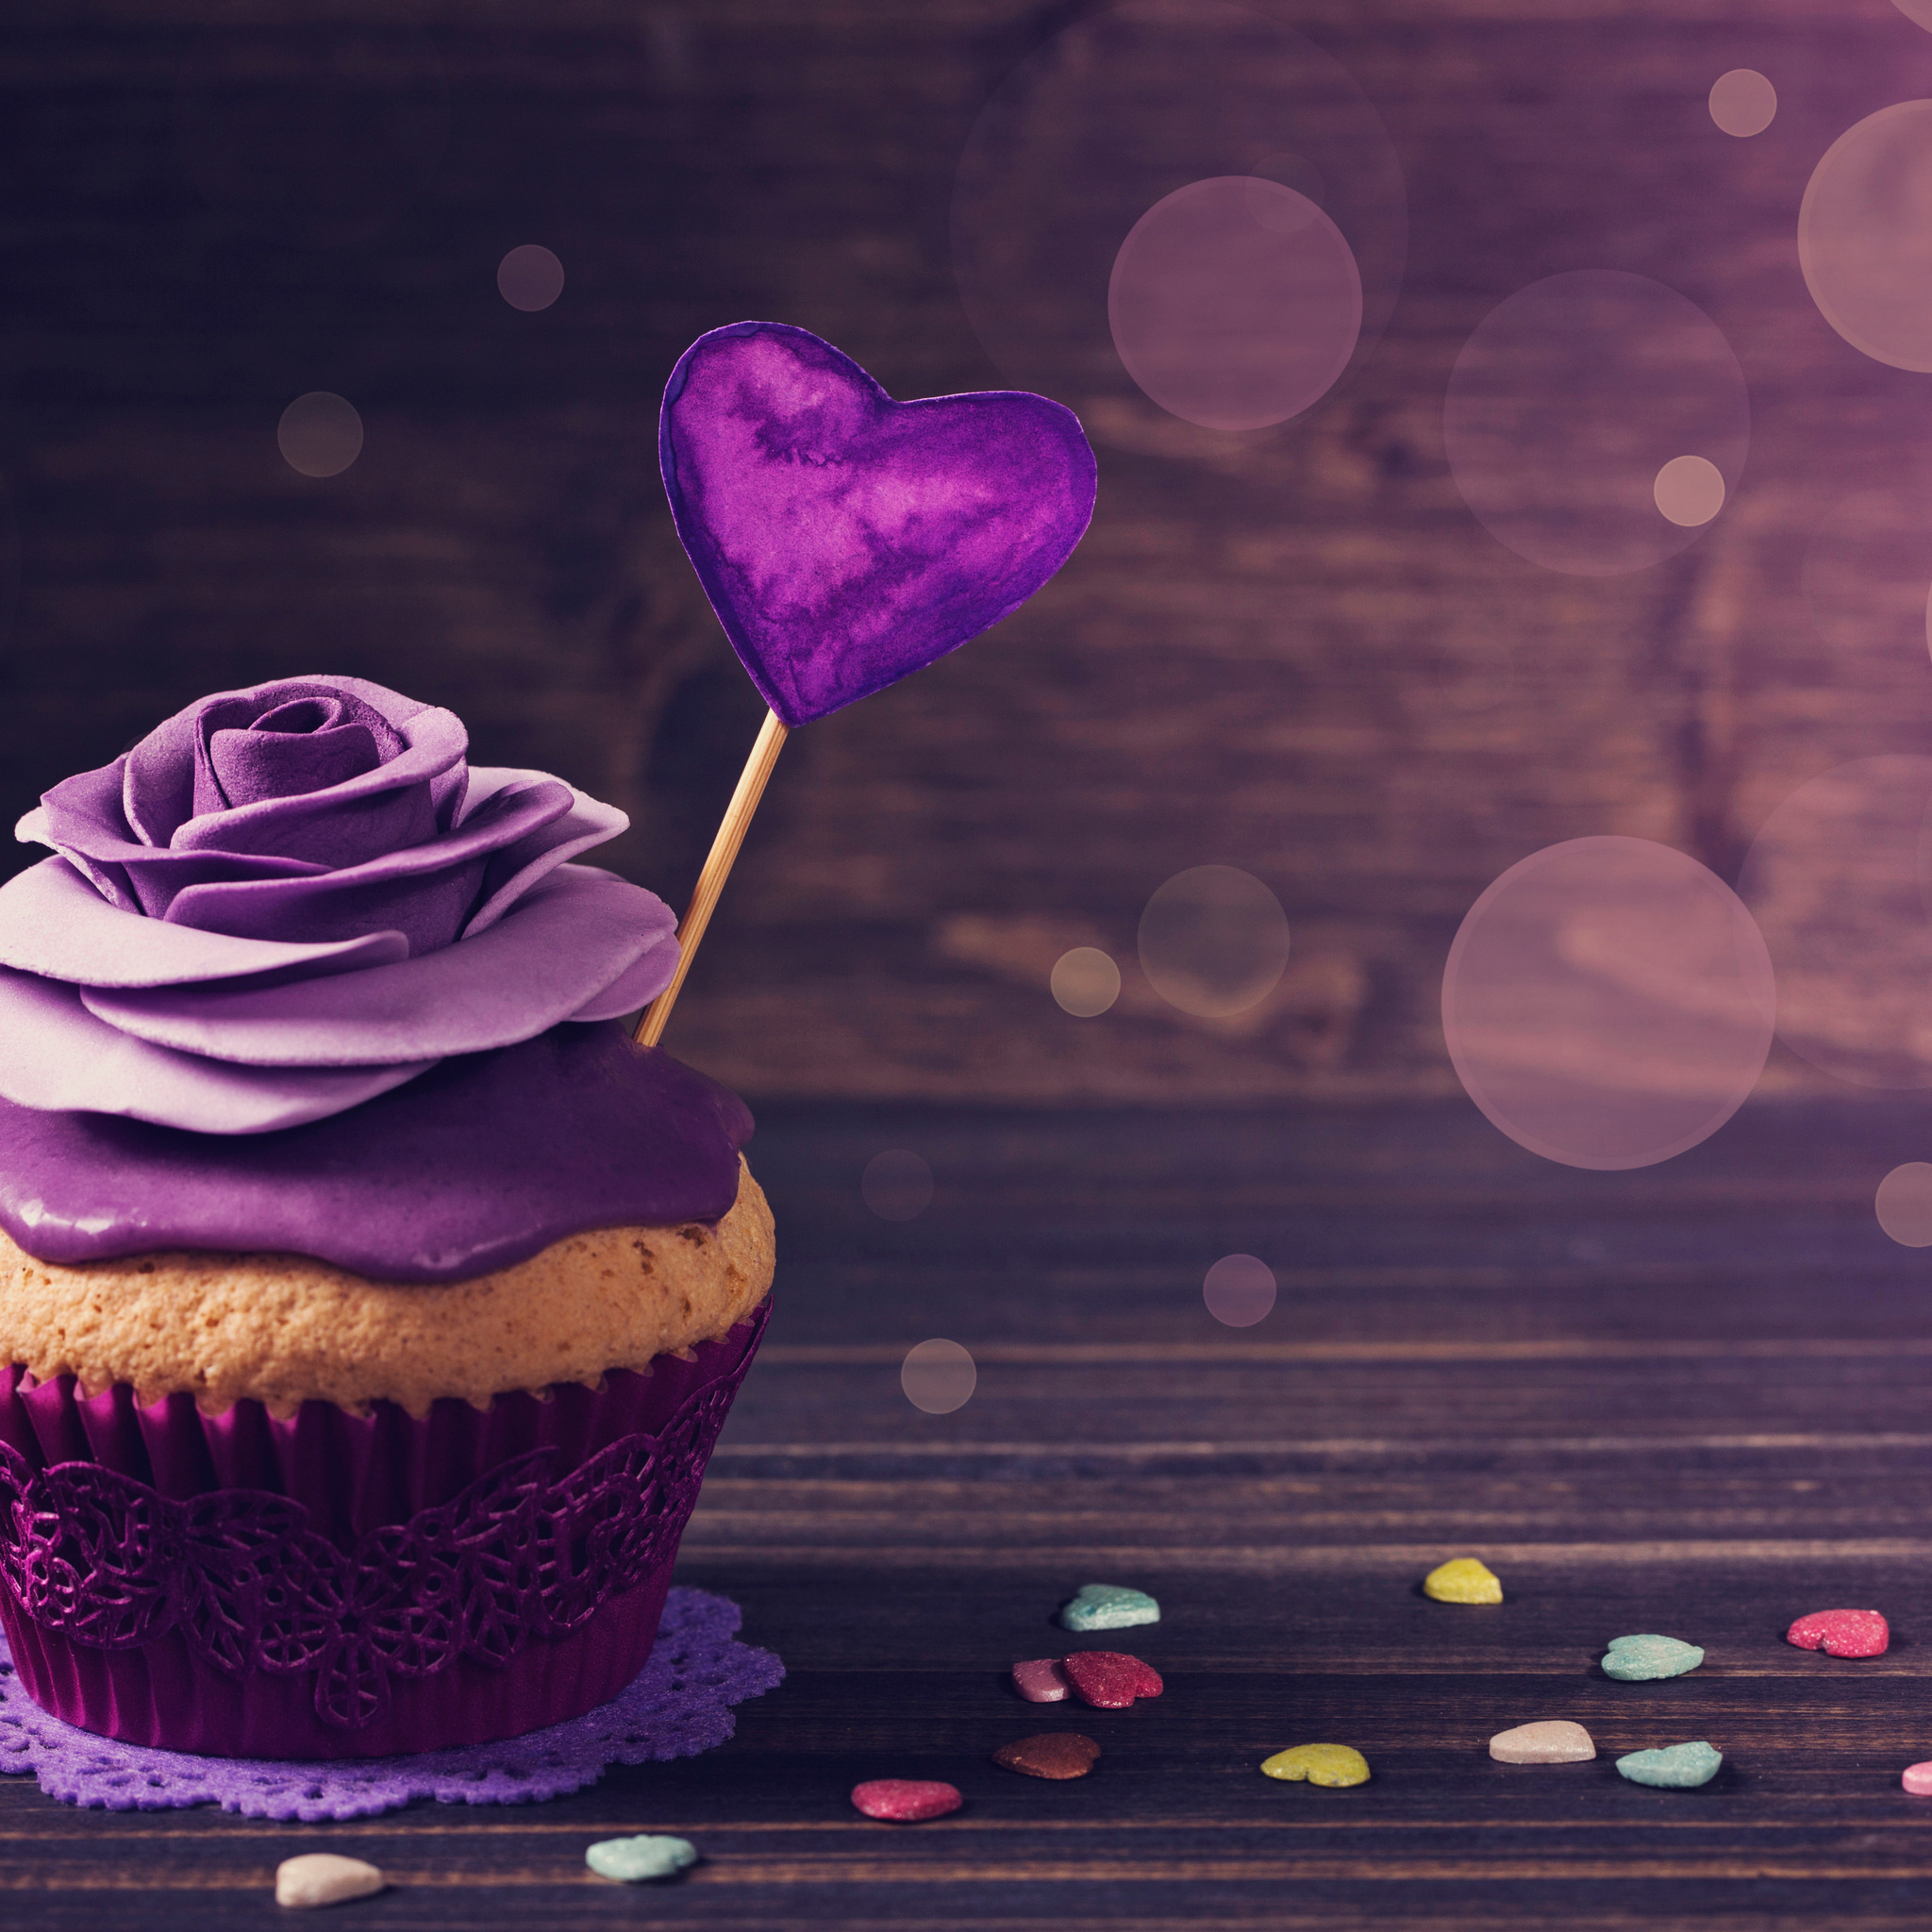 Muffin: Made with various flavors such as blueberries, chocolate chips, nuts, or spices. 2050x2050 HD Wallpaper.